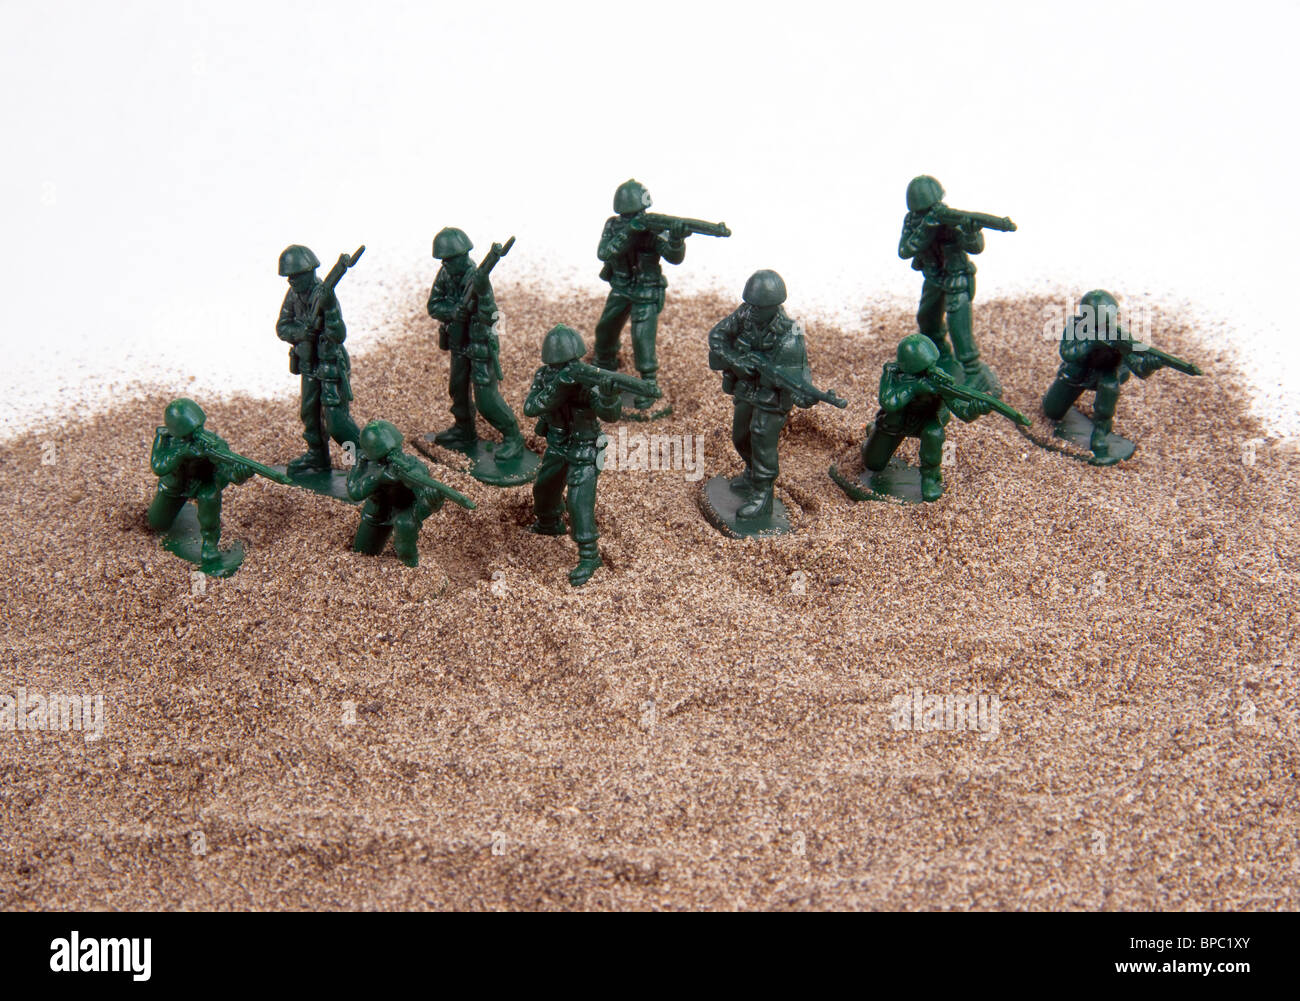 A group of little plastic green army men set up on a sandpile against a white background. Stock Photo